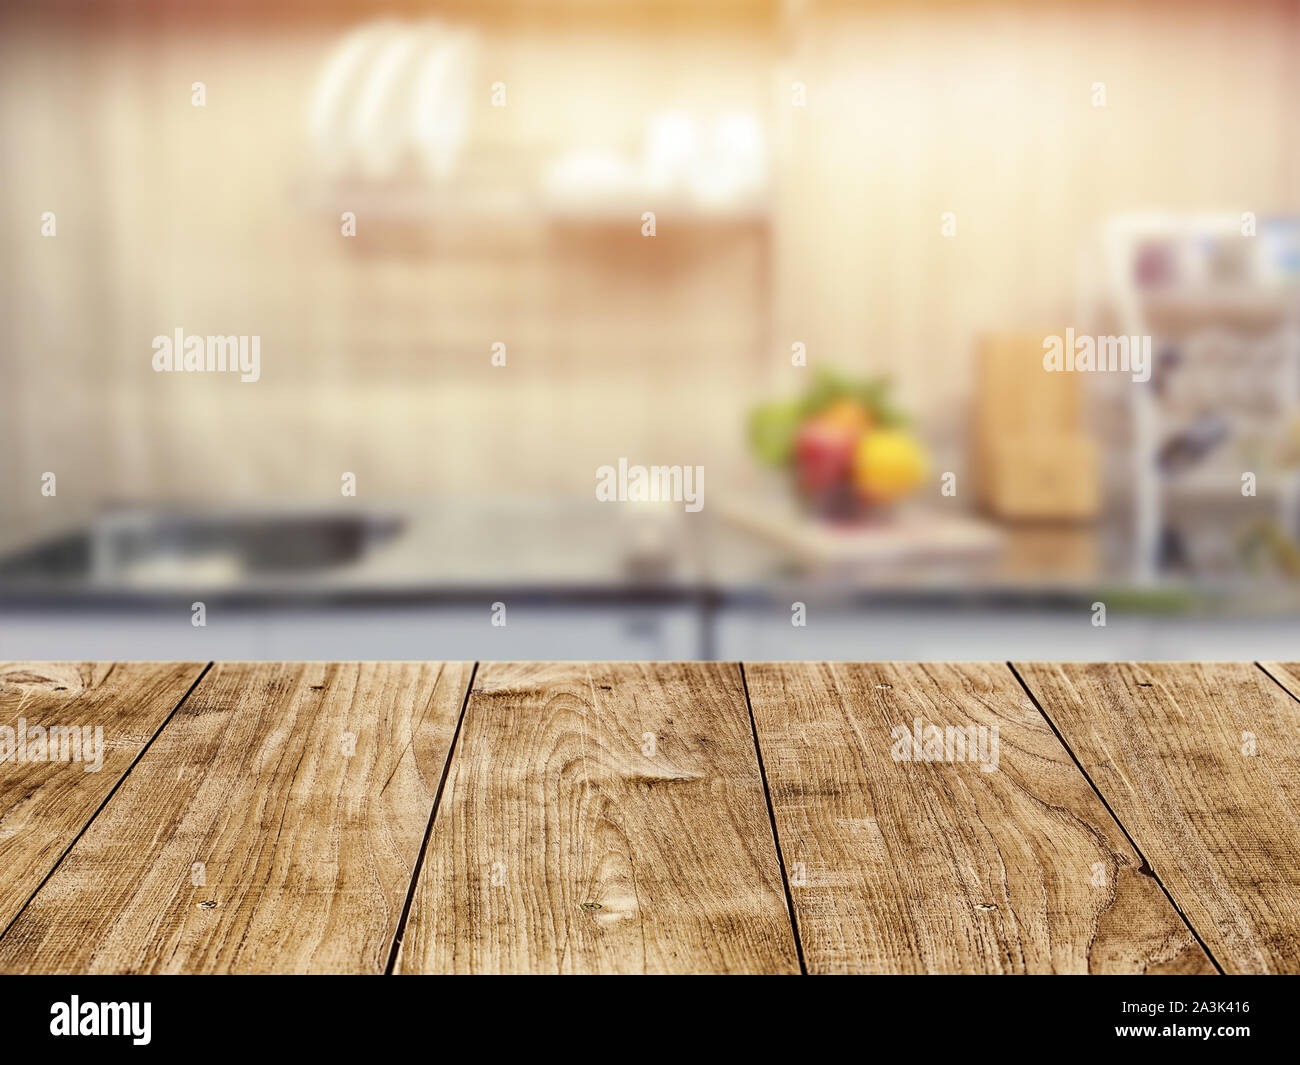 Wood table top in kitchen room blur background for montage product display or backdrop design layout. Stock Photo